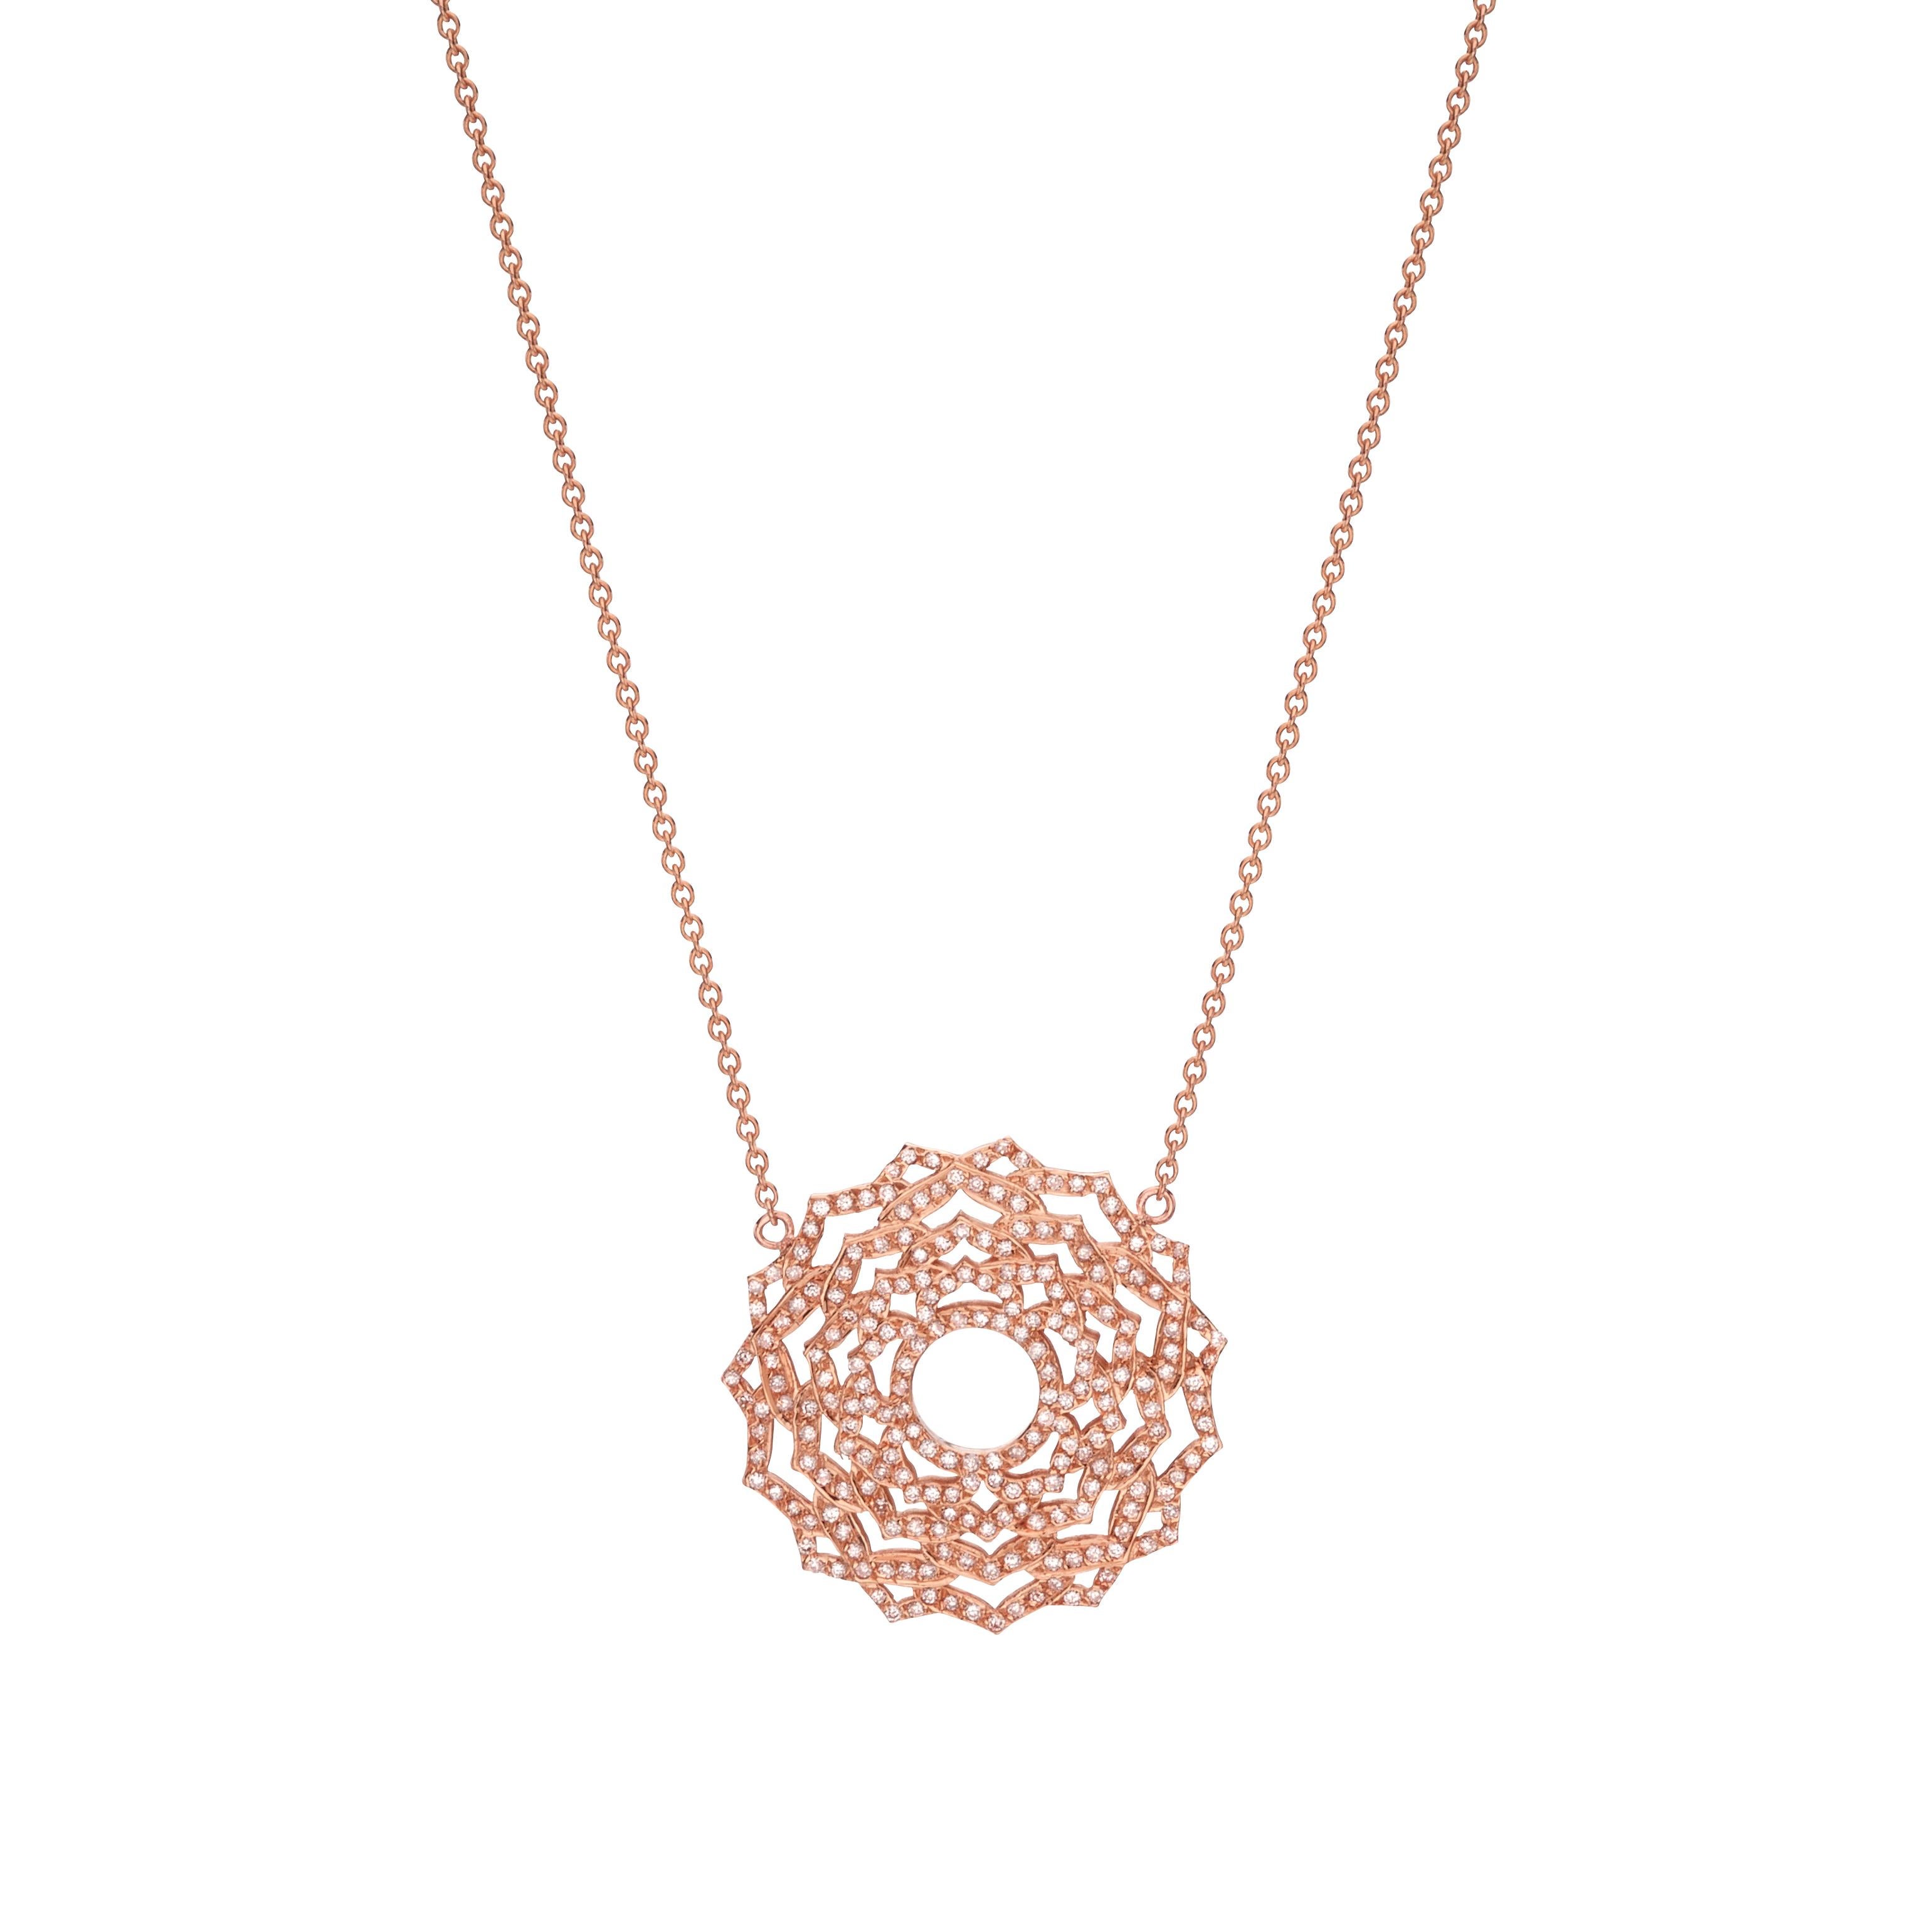 Brilliant Cut Sahasrara Crown Chakra Pendant Necklace in 18Kt Rose Gold with Diamonds For Sale